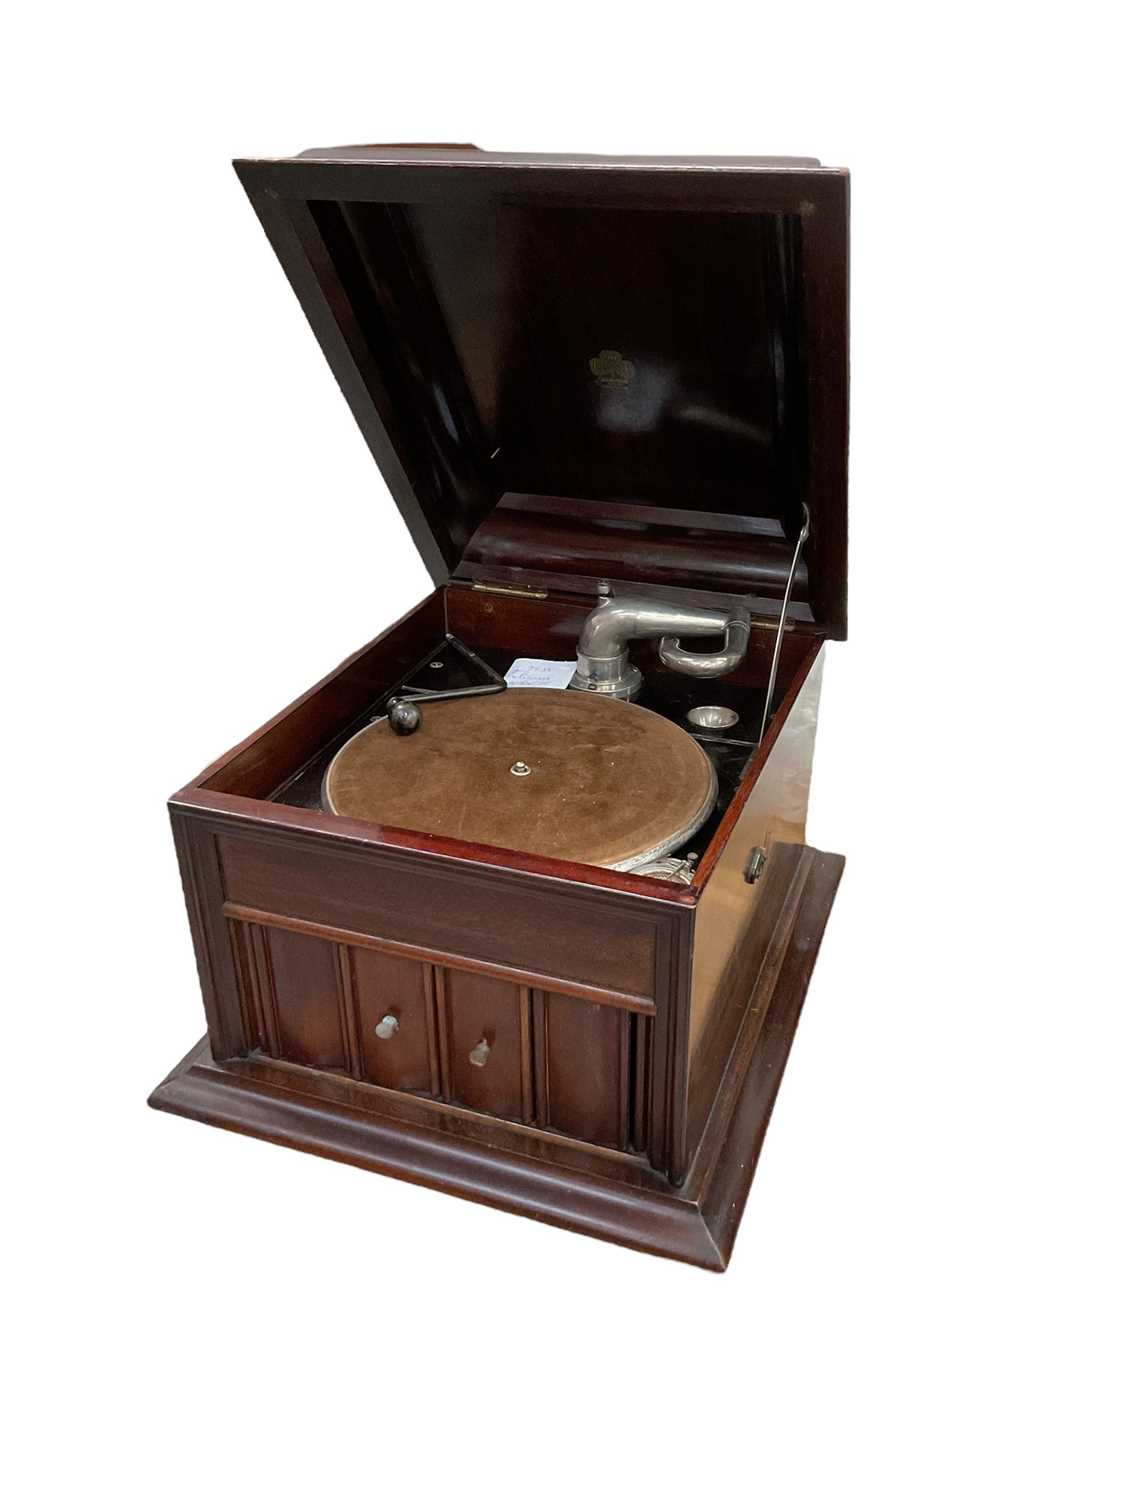 Lot 2212 - The Celeste - mahogany cased gramophone with group of records